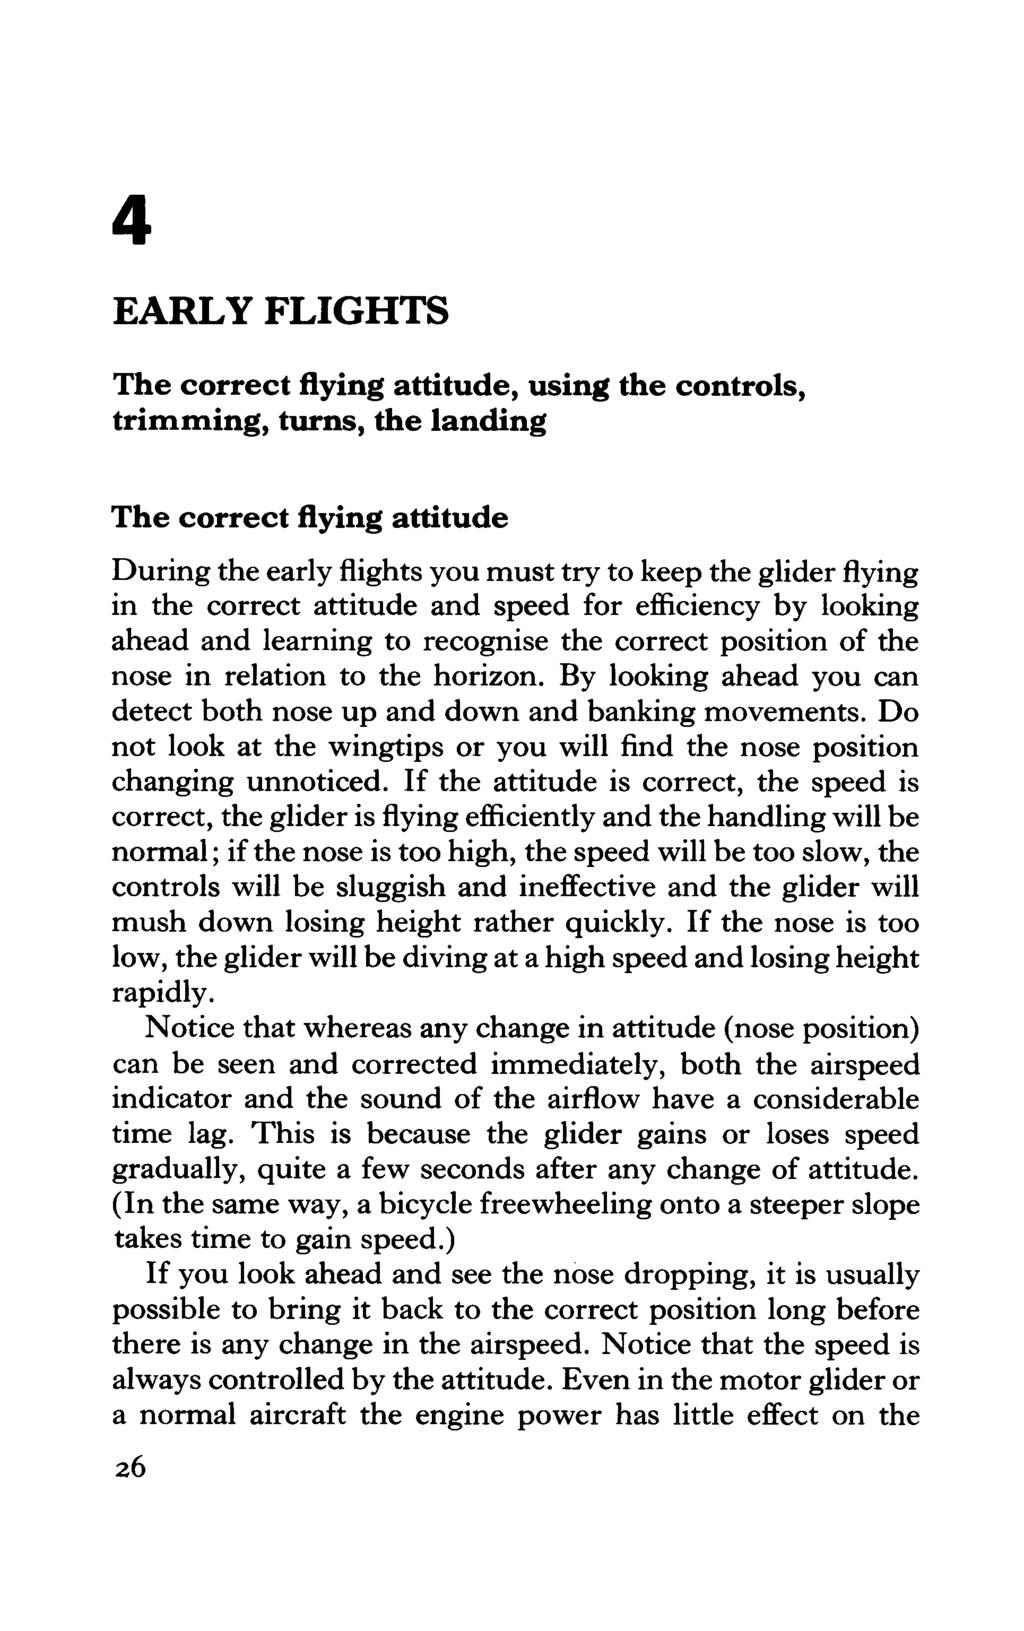 EARLY FLIGHTS The correct flying attitude, using the controls, trimming, turns, the landing The correct flying attitude During the early flights you must try to keep the glider flying in the correct